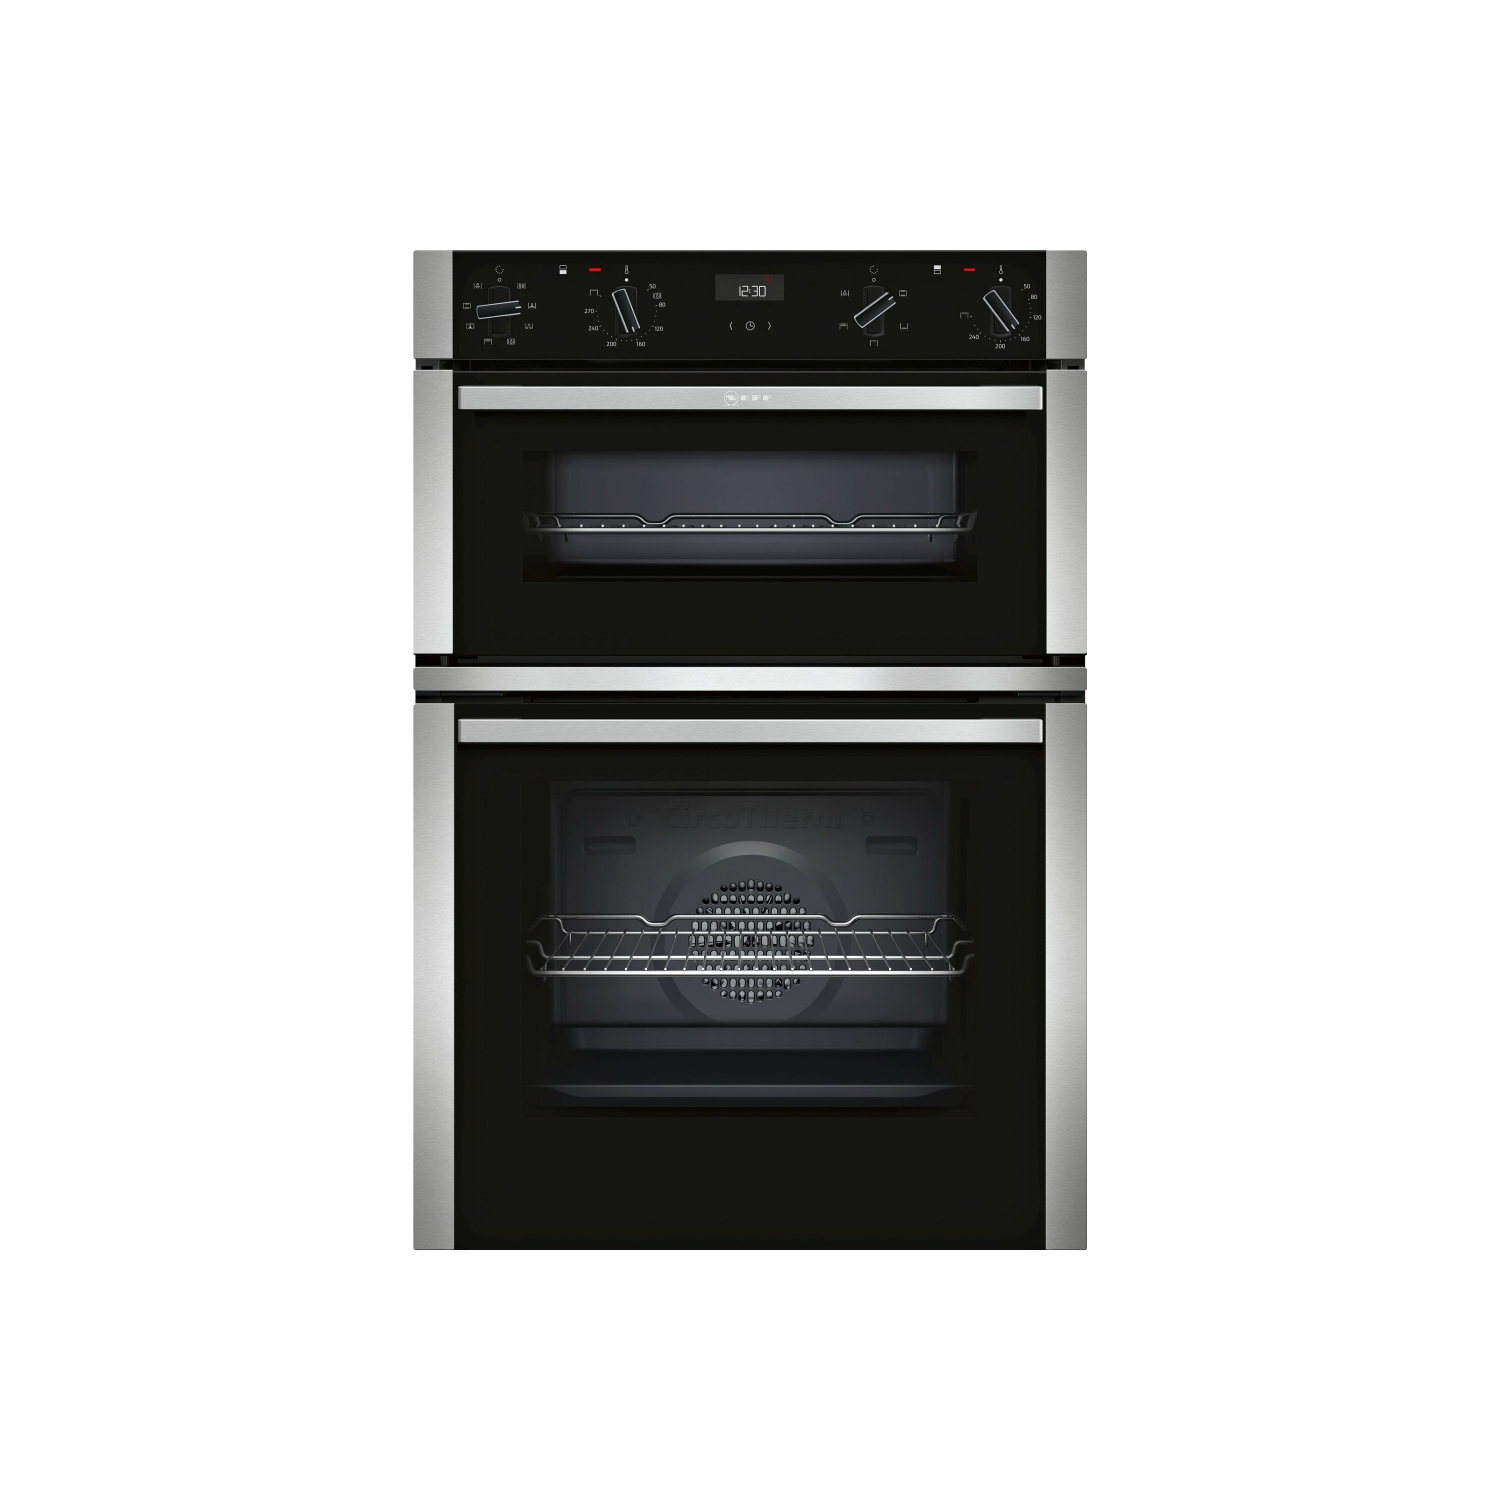 Neff U1ACE2HN0B 59.4cm Built In Electric CircoTherm Double Oven - BLACK/STEEL - 5